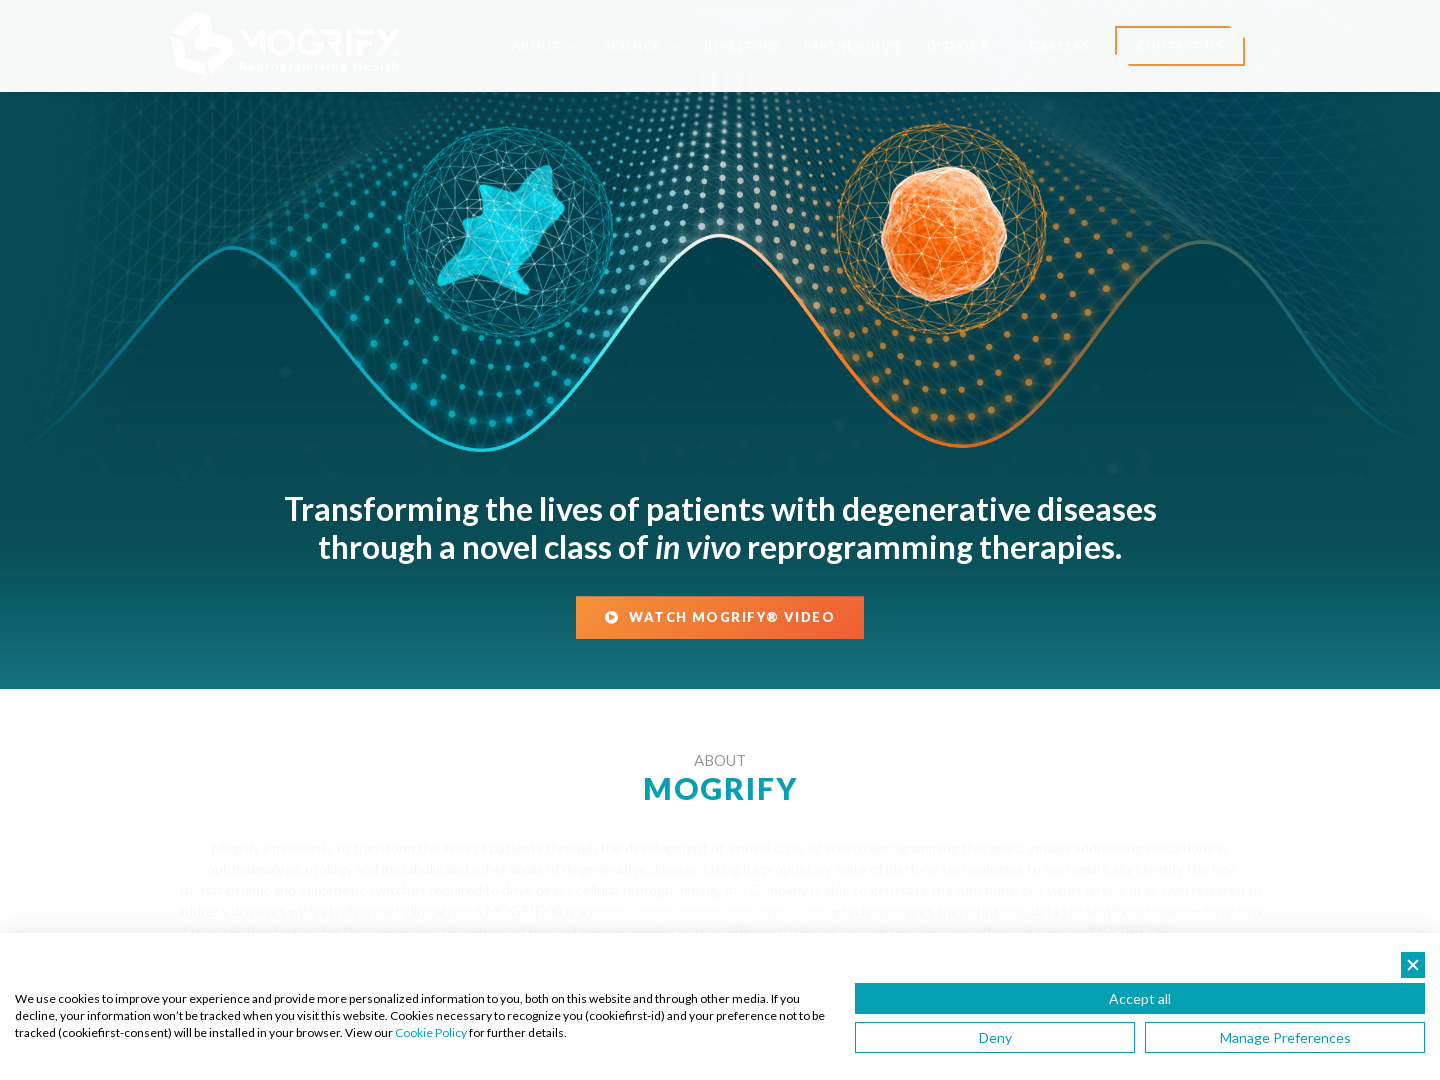 Mogrify Secures $10M Funding to Advance In Vivo Reprogramming Therapies